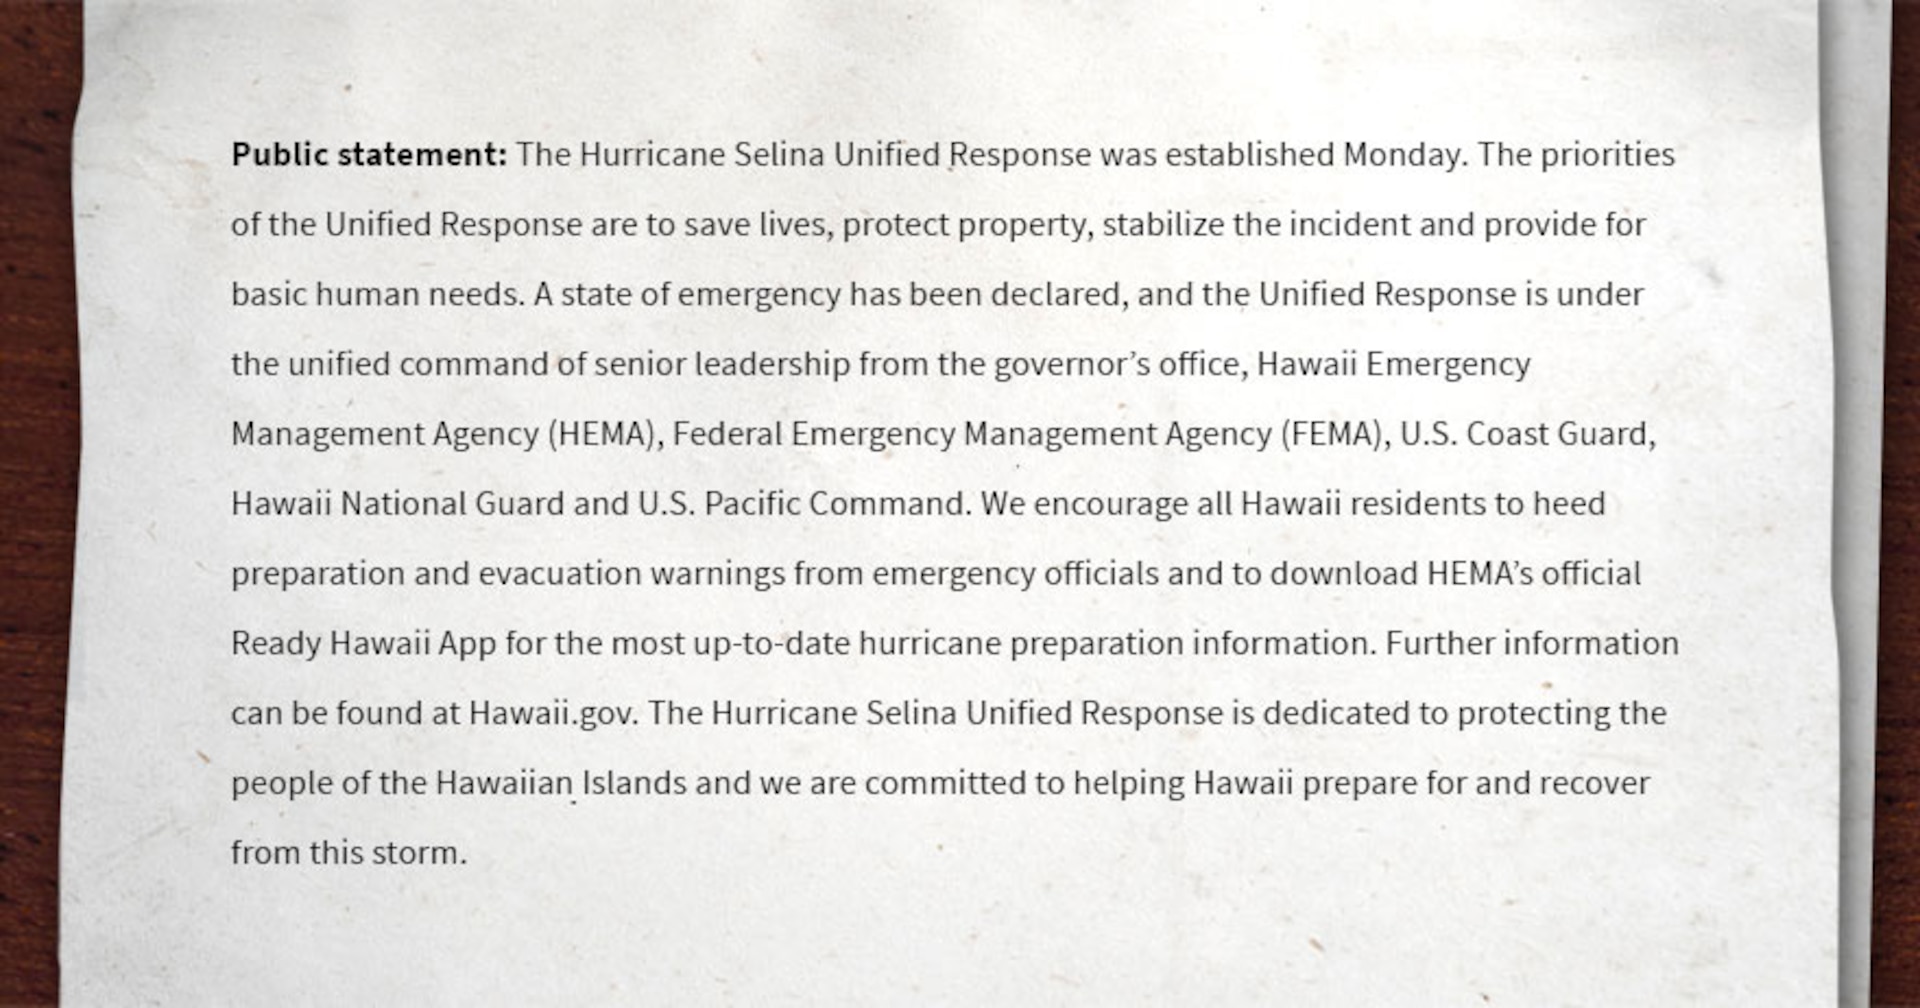 Public statement: The Hurricane Selina Unified Response was established Monday. The priorities of the Unified Response are to save lives, protect property, stabilize the incident and provide for basic human needs. A state of emergency has been declared, and the Unified Response is under the unified command of senior leadership from the governor’s office, Hawaii Emergency Management Agency (HEMA), Federal Emergency Management Agency (FEMA), U.S. Coast Guard, Hawaii National Guard and U.S. Pacific Command. We encourage all Hawaii residents to heed preparation and evacuation warnings from emergency officials and to download HEMA’s official Ready Hawaii App for the most up-to-date hurricane preparation information. Further information can be found at Hawaii.gov. The Hurricane Selina Unified Response is dedicated to protecting the people of the Hawaiian Islands and we are committed to helping Hawaii prepare for and recover from this storm.